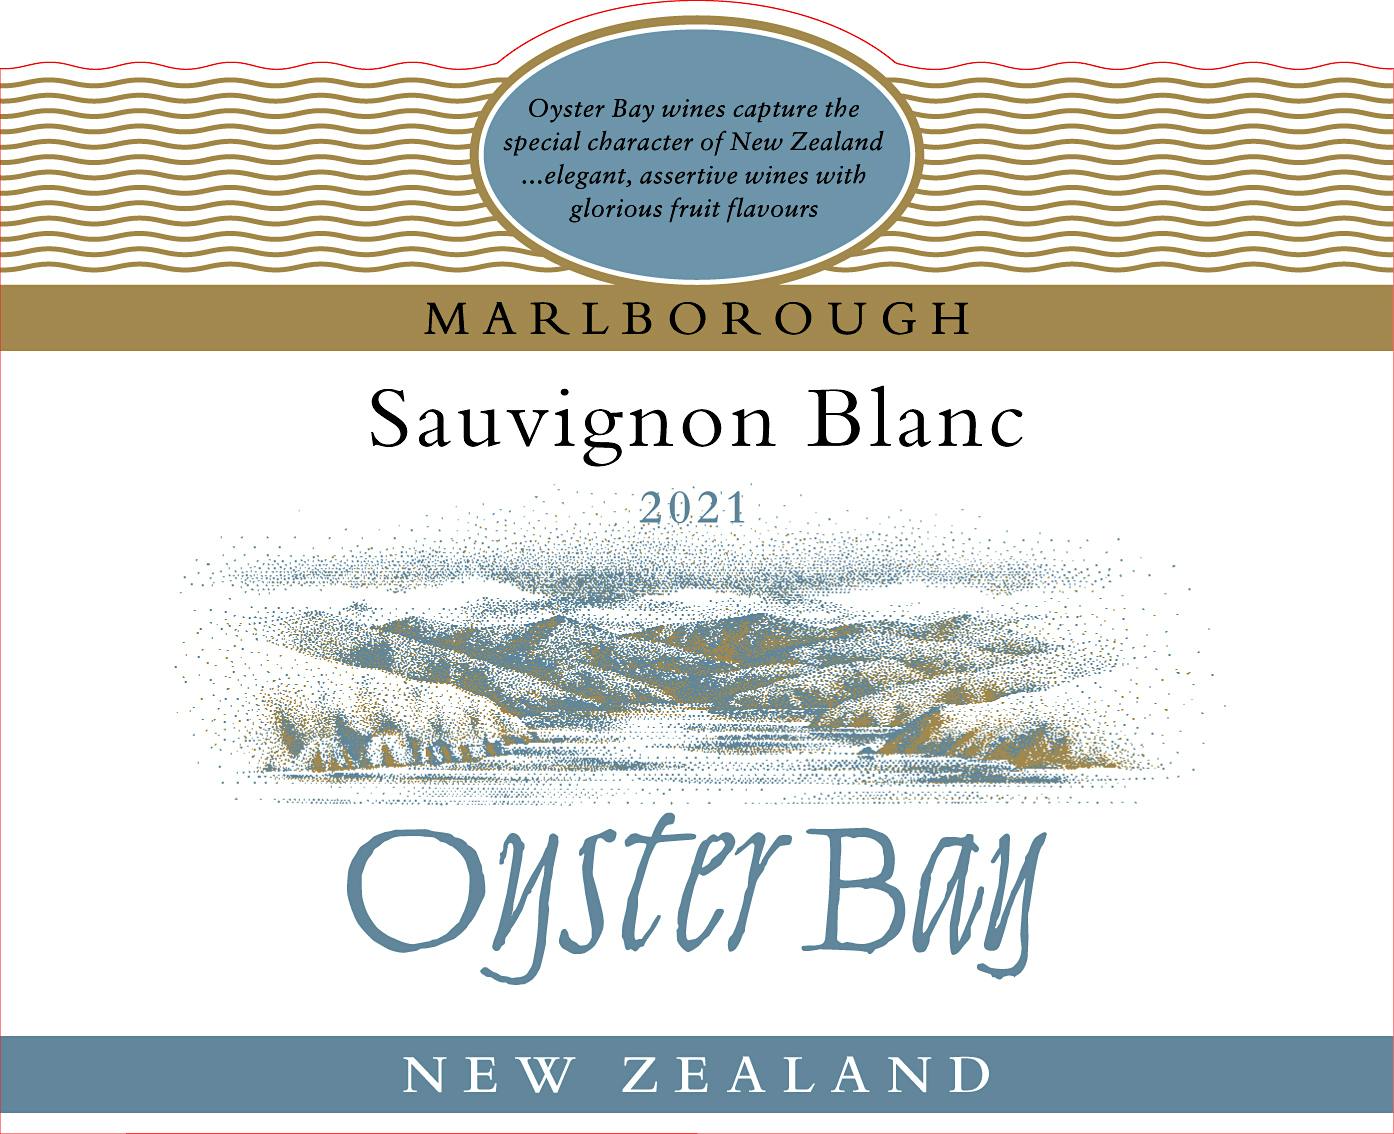 Label for Oyster Bay